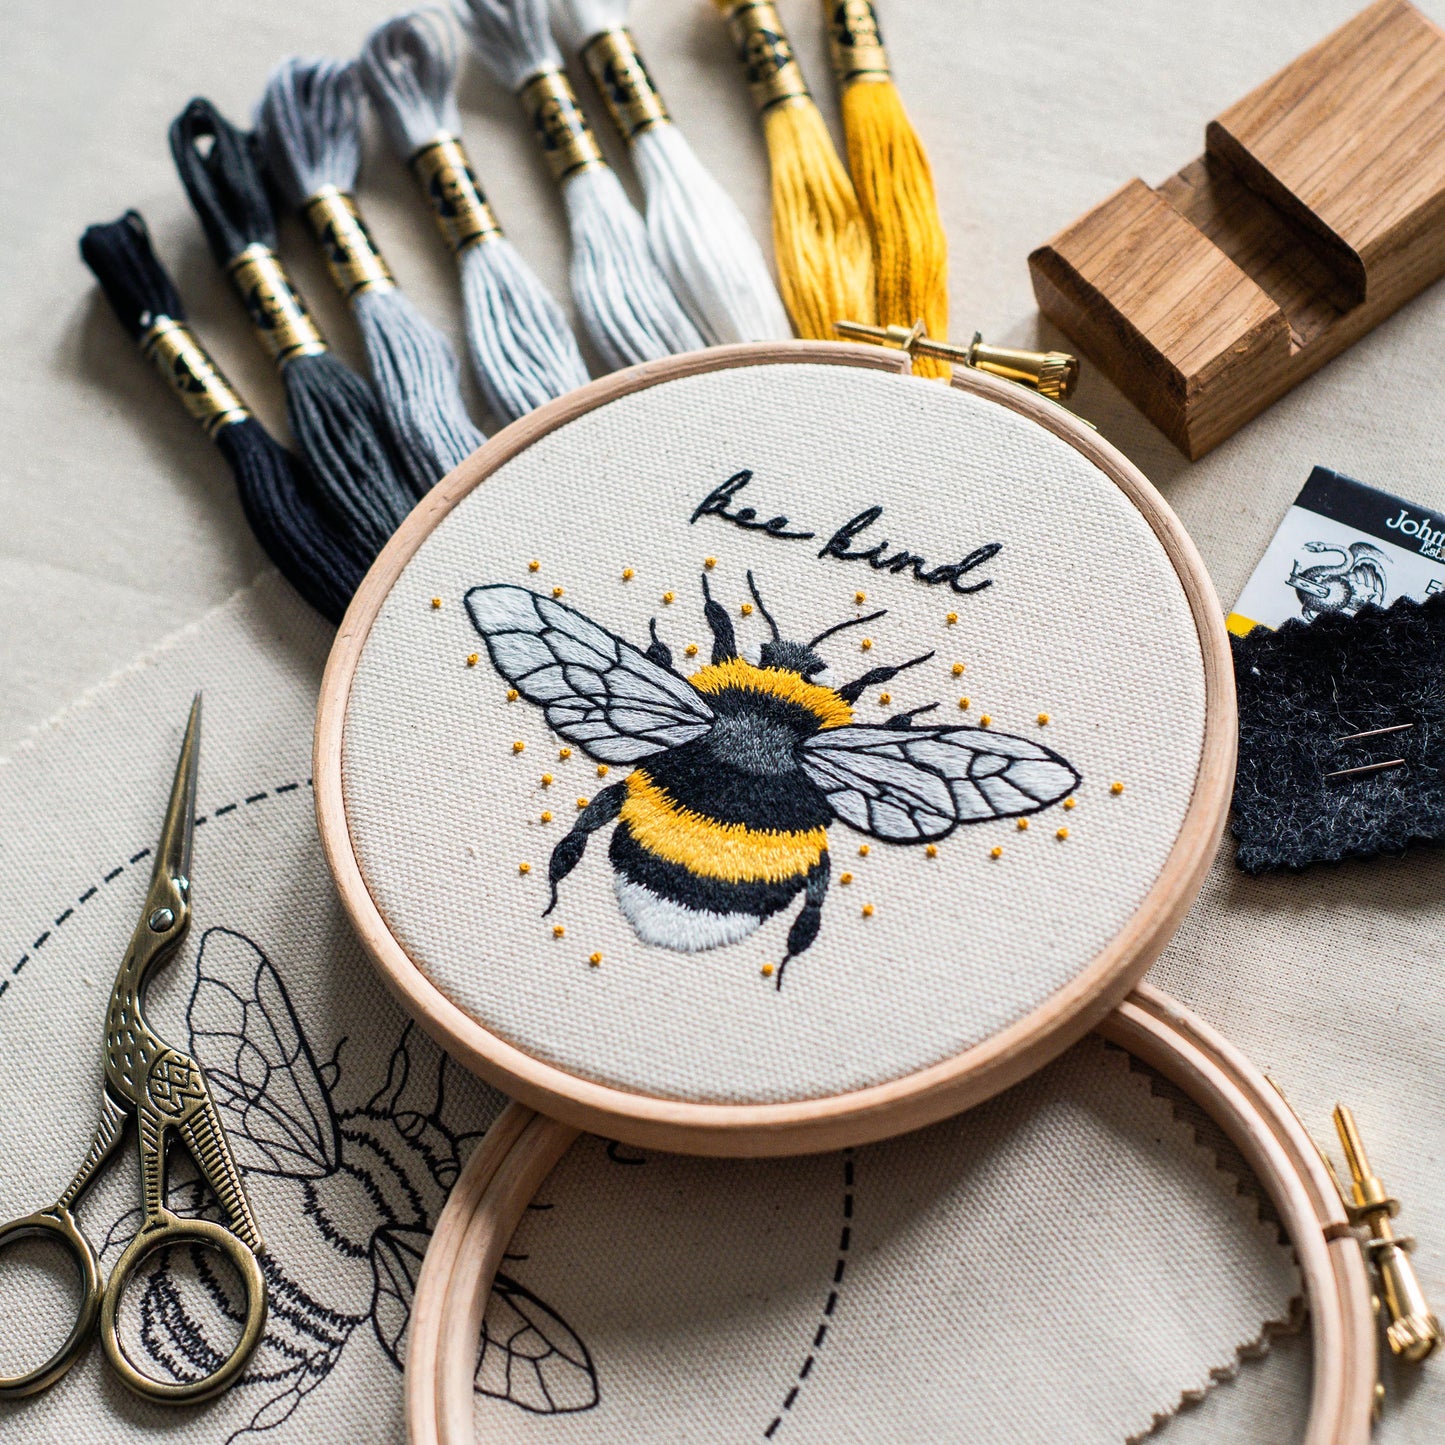 'The Mindful Bumblebee' - Embroidery Kit